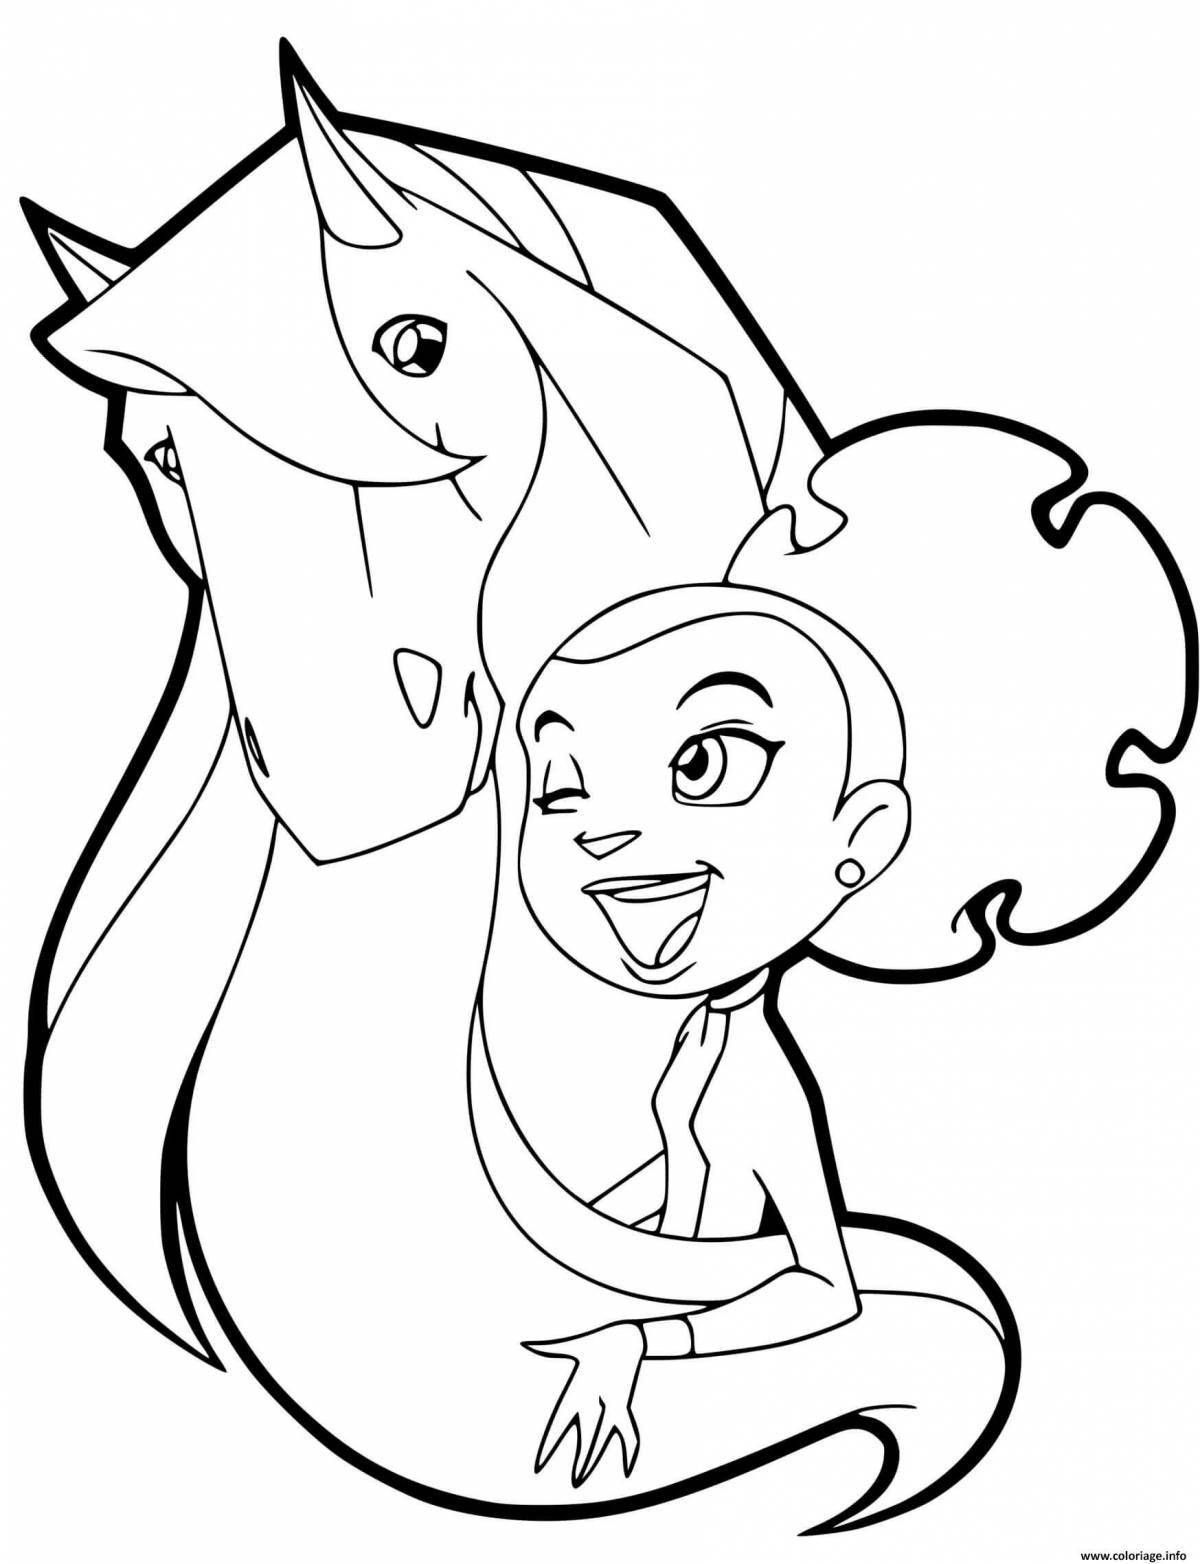 Coloring page glorious land of horses